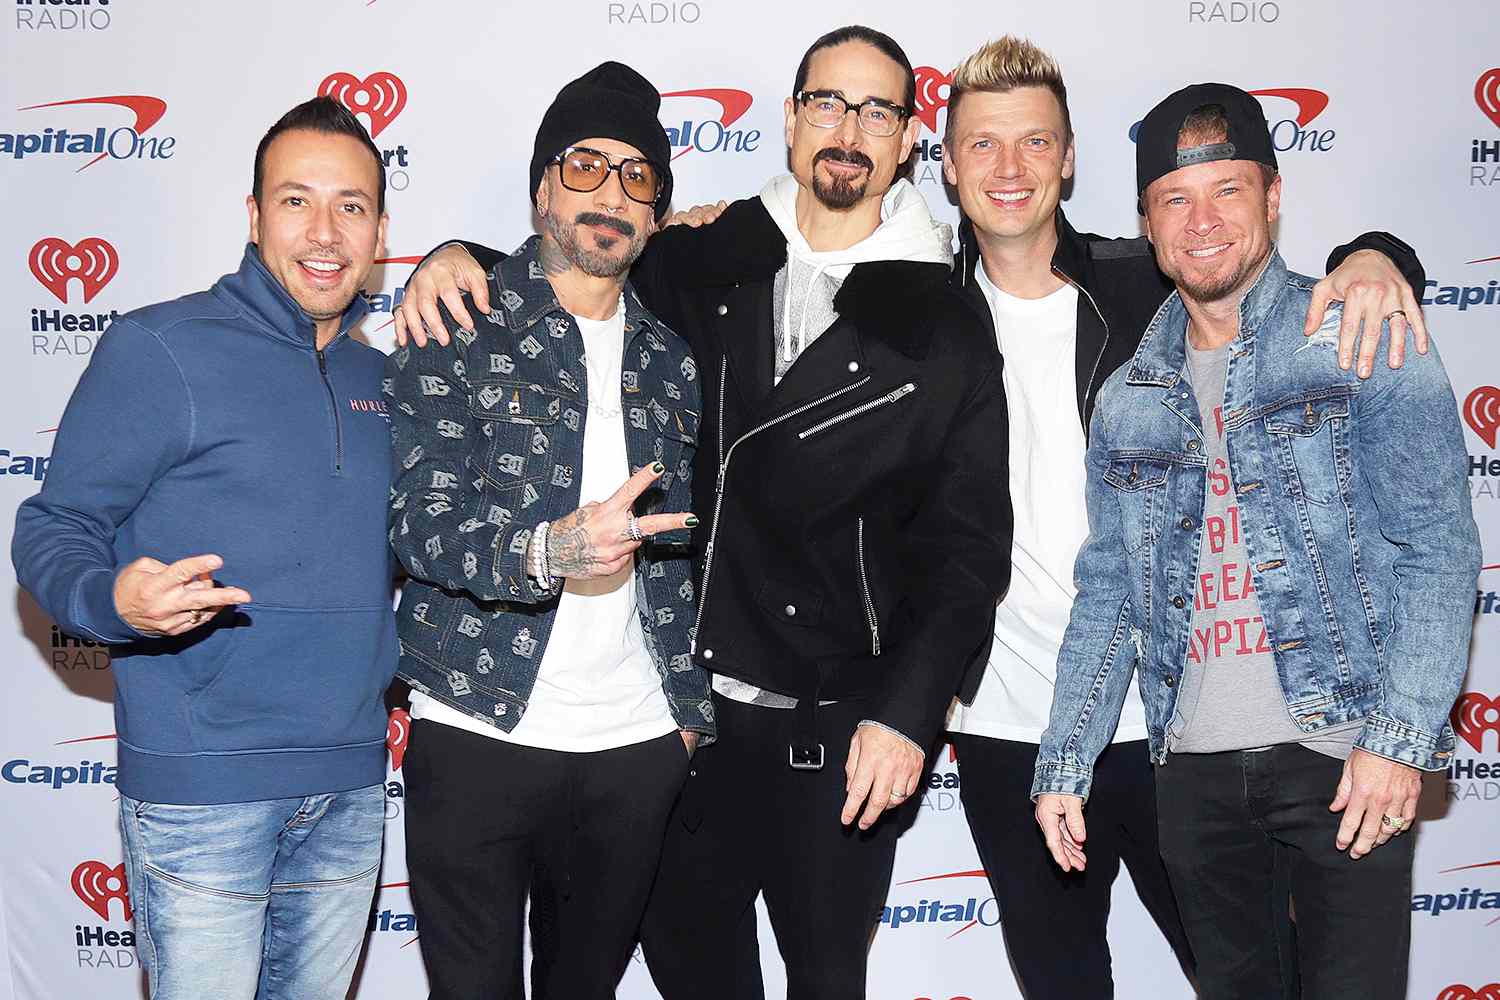 Meet the Real-Life Loves of the Backstreet Boys